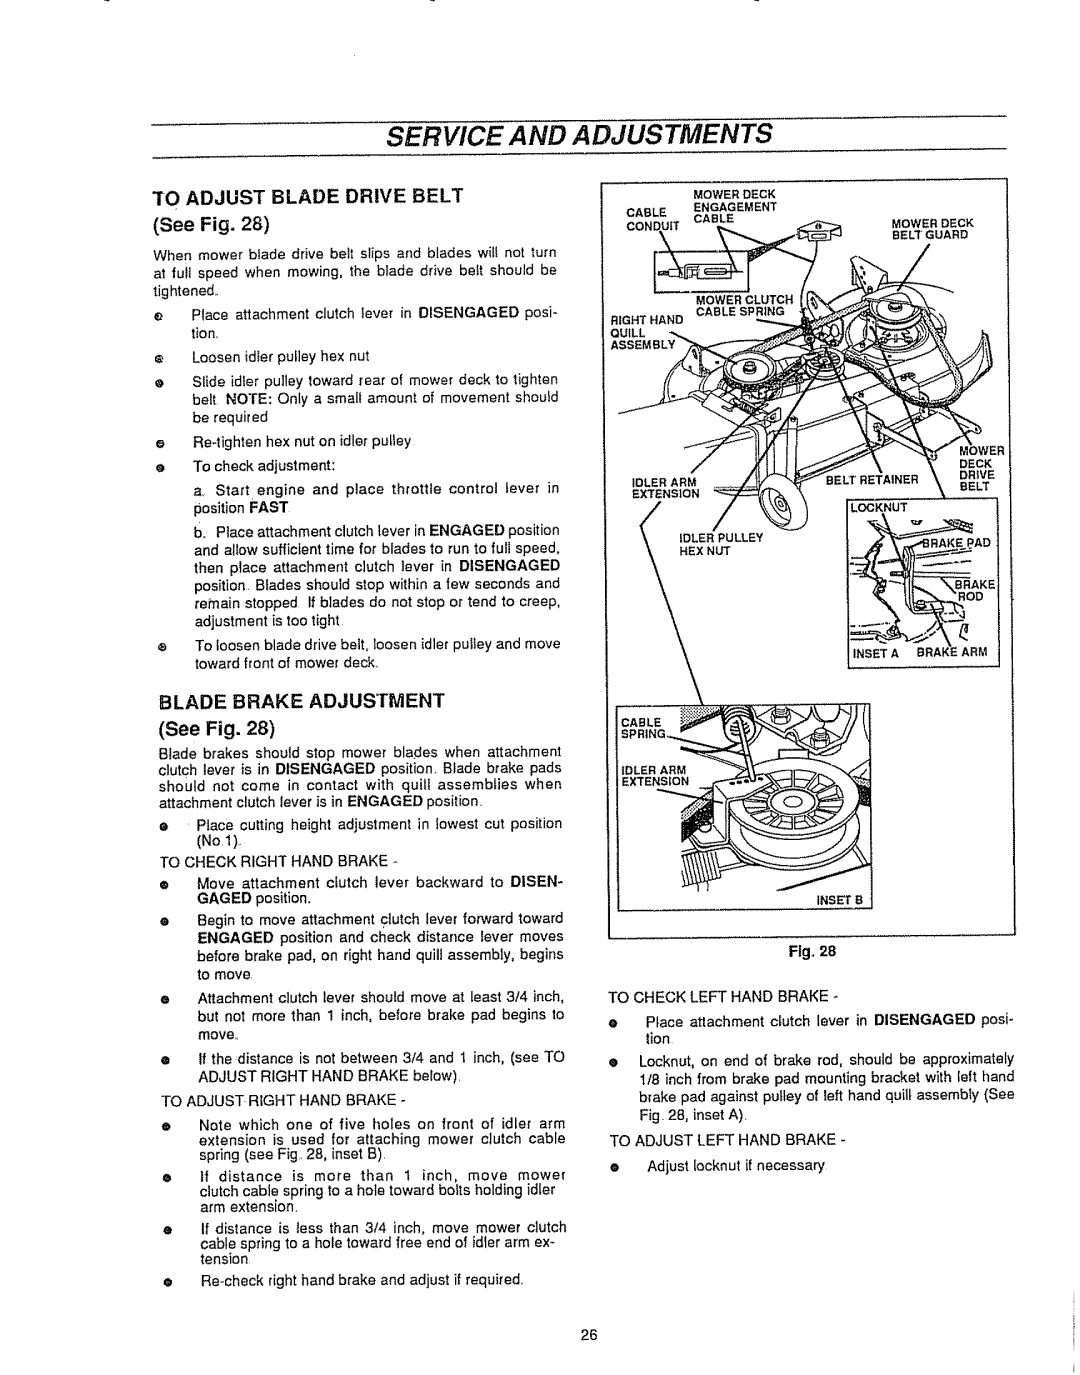 Sears 536.25587 owner manual Service And, Adjustments, TO ADJUST BLADE DRIVE BELT See Fig, No,t, eTo check adjustment 